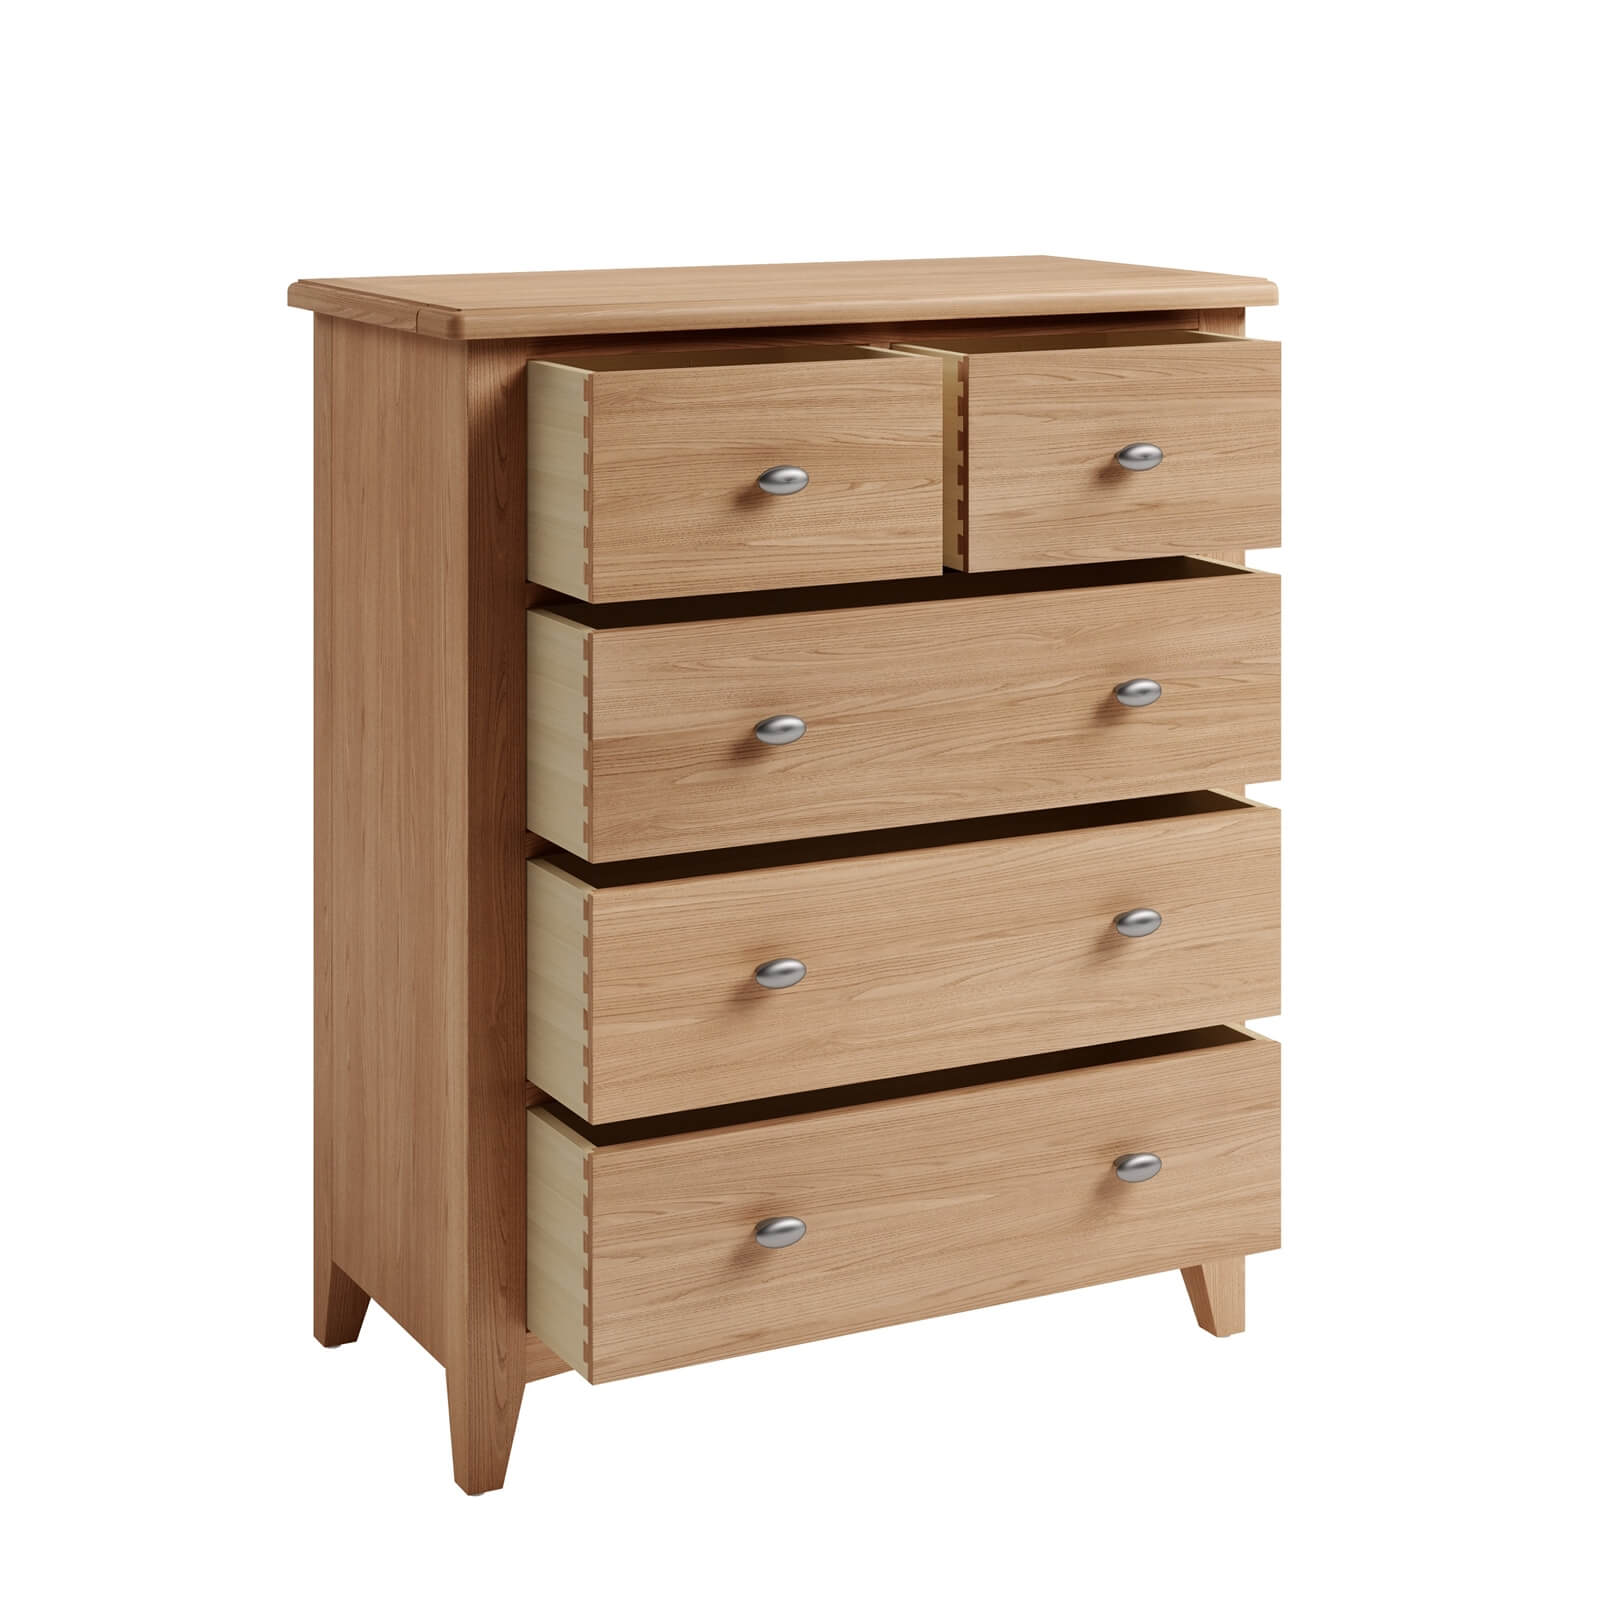 Kea 2 Over 3 Chest of Drawers - Oak